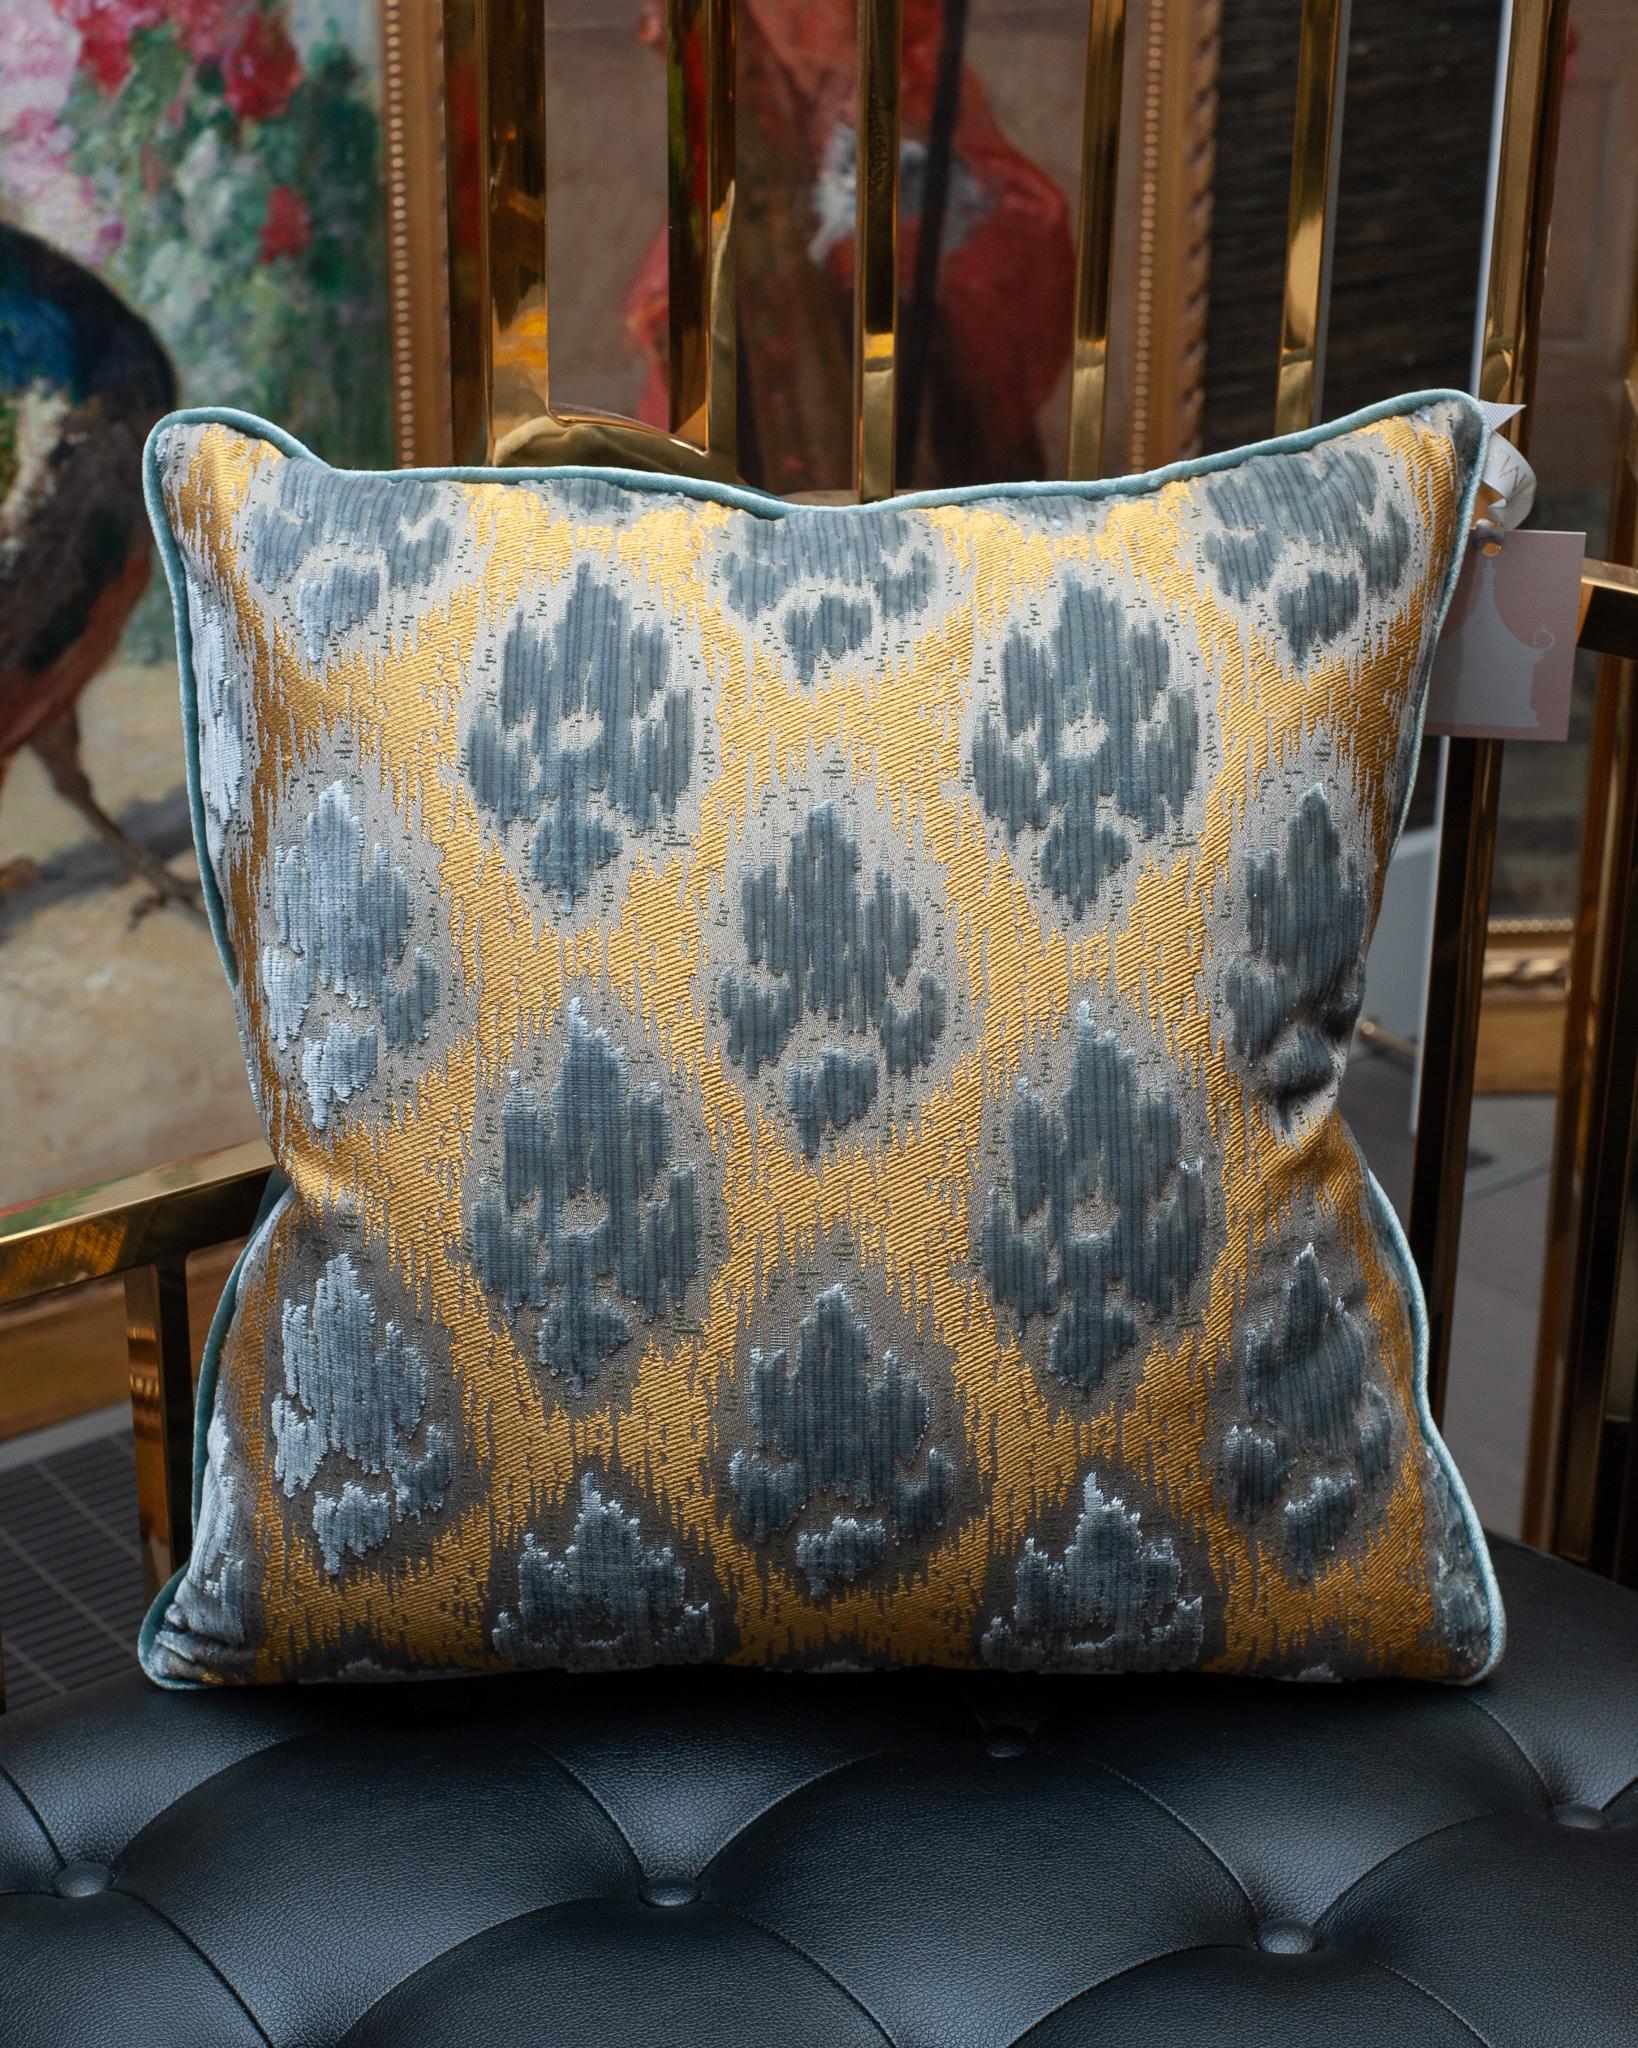 A Bevilacqua blue and gold silk velvet pillow with a silk velvet back and piped edge. Filled with Canadian feather and down.

Established by Luigi Bevilacqua, and operating out of Venice since 1875, Bevilacqua Tessuti produces the most exquisite